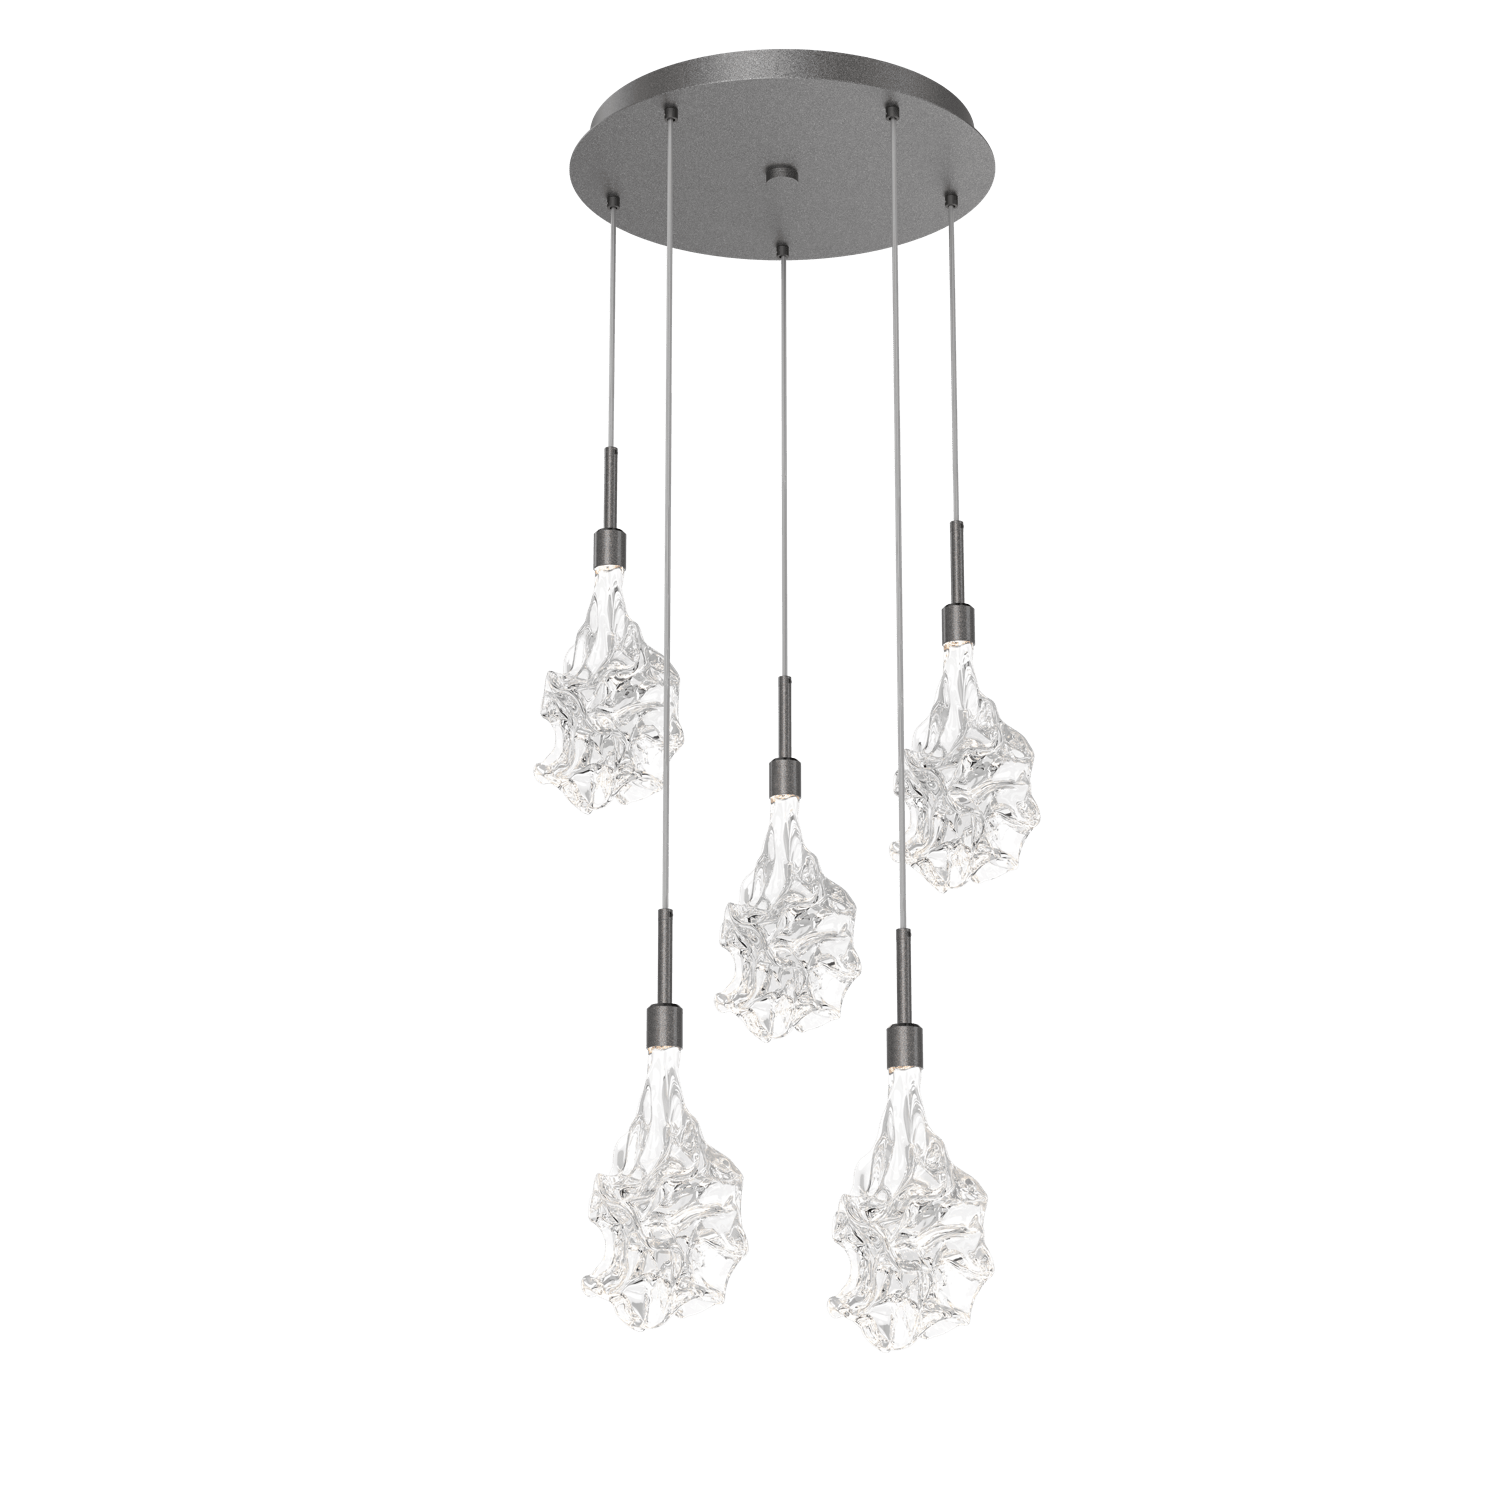 CHB0059-05-GP-Hammerton-Studio-Blossom-5-light-round-pendant-chandelier-with-graphite-finish-and-clear-handblown-crystal-glass-shades-and-LED-lamping